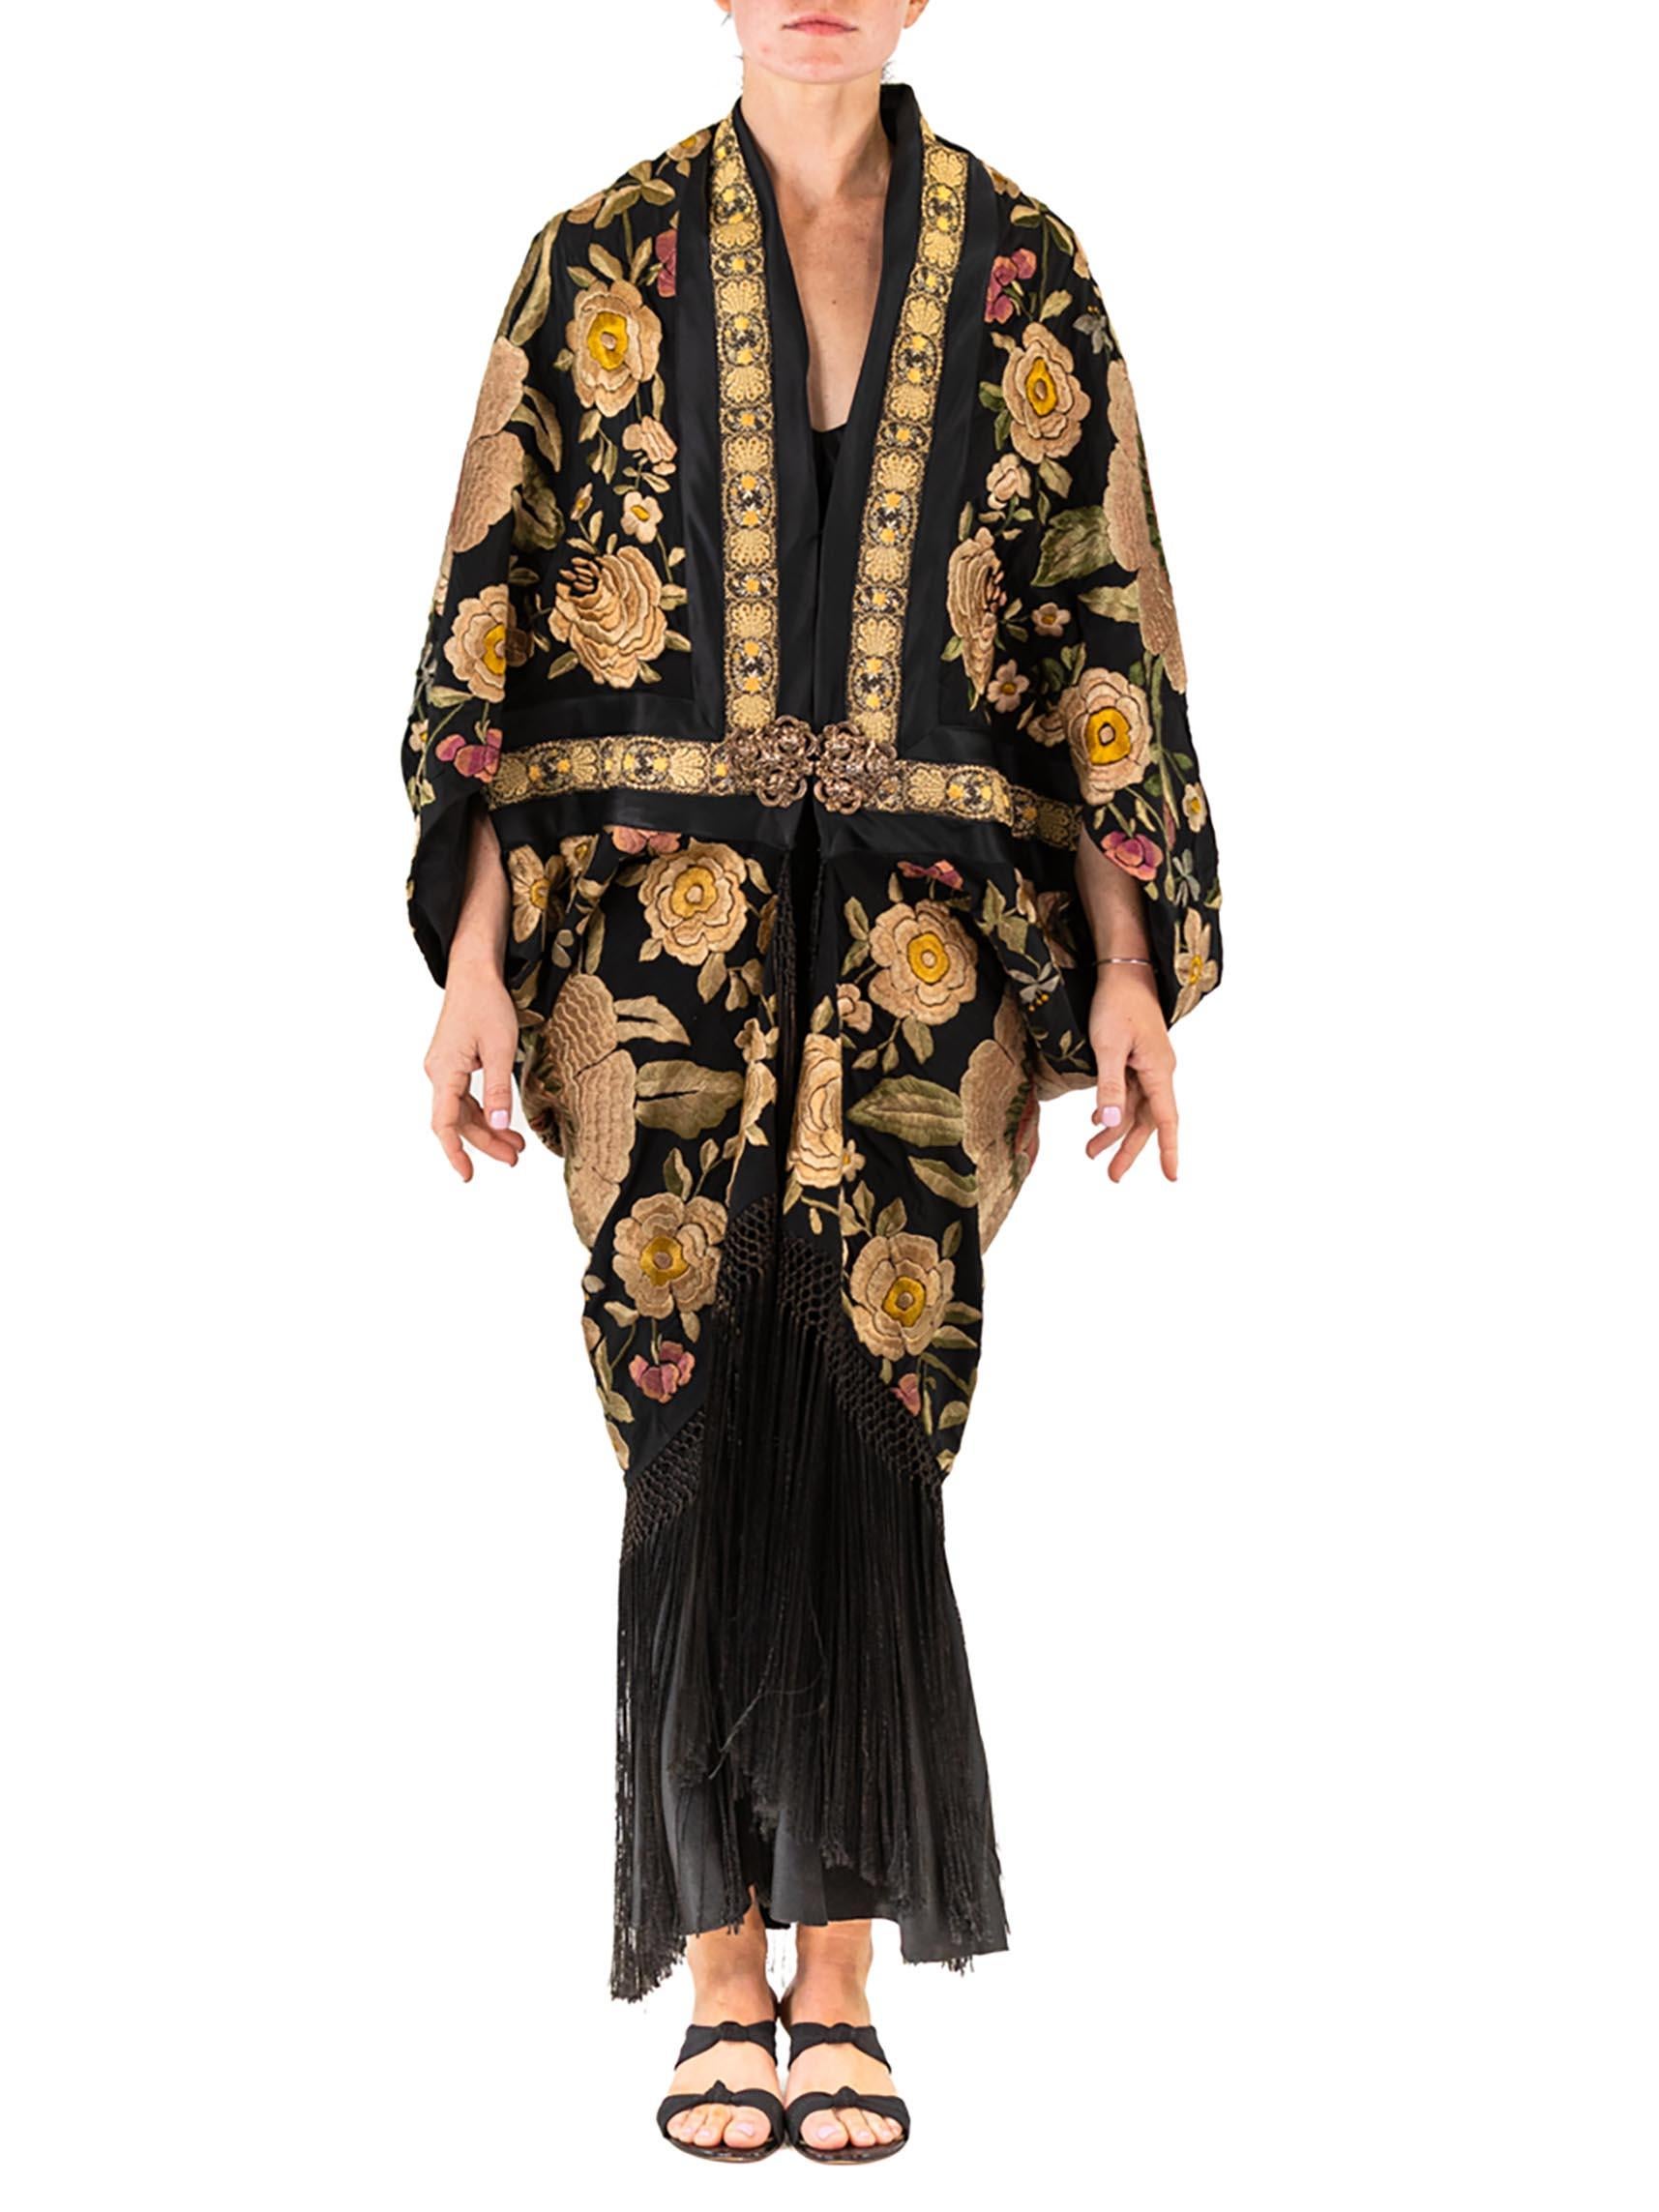 Inspired by the works of Paul Poiret. Each Morphew Collection Cocoon is made from an antique piano shawl. Each piece beautifully embroidered in silk threads by hand nearly 100 years ago. Made in New York we drape, pleat and don’t cut each piece into